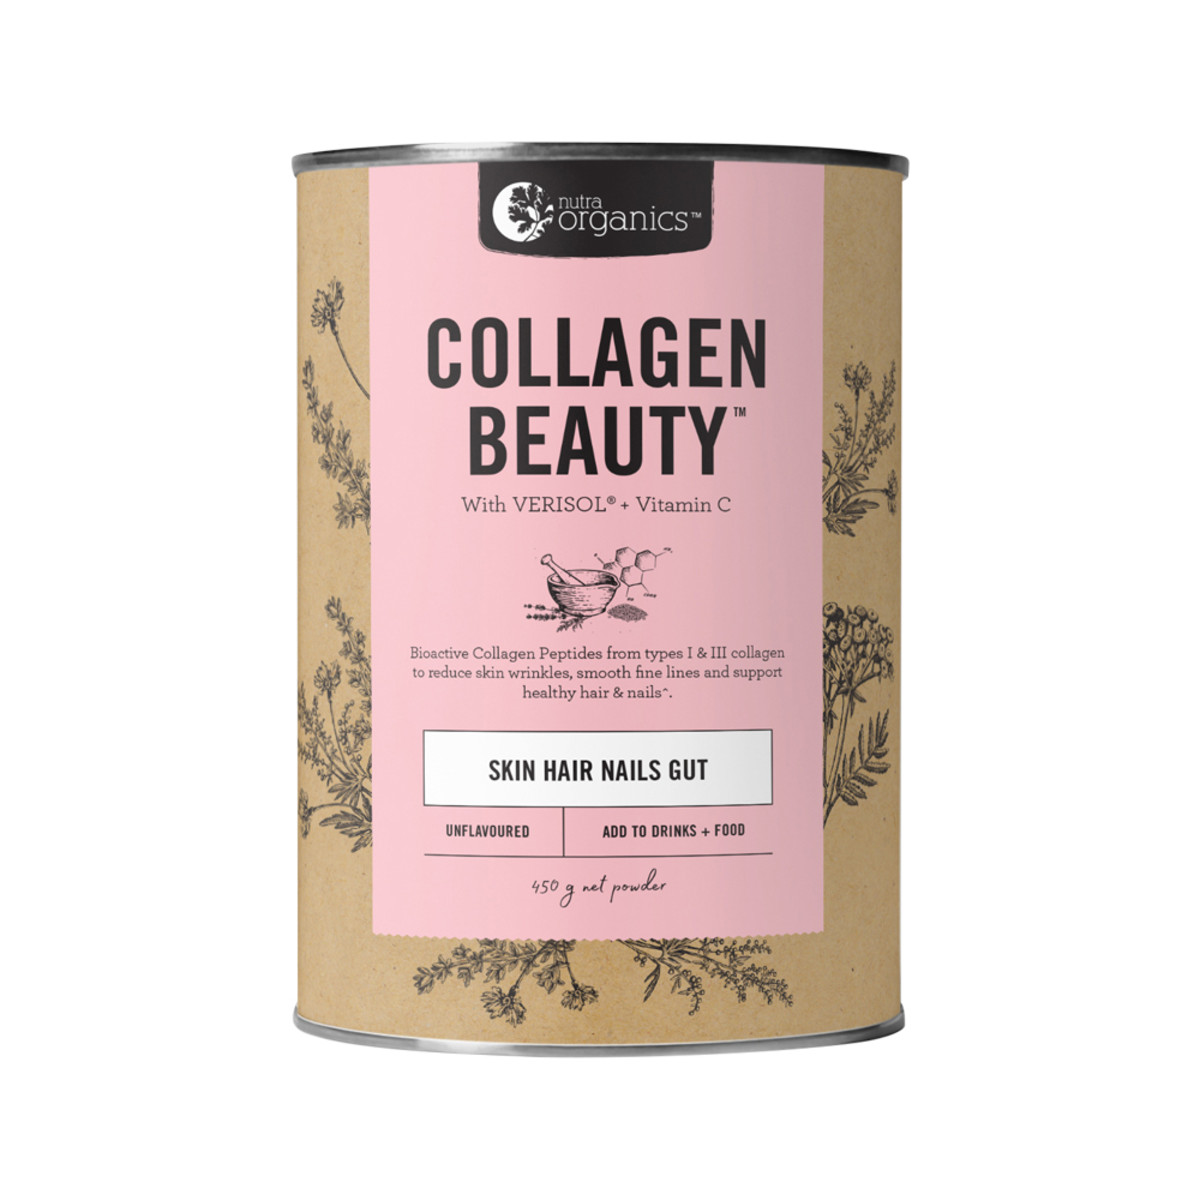 NUTRA ORGANICS - Collagen Beauty with Verisol + C